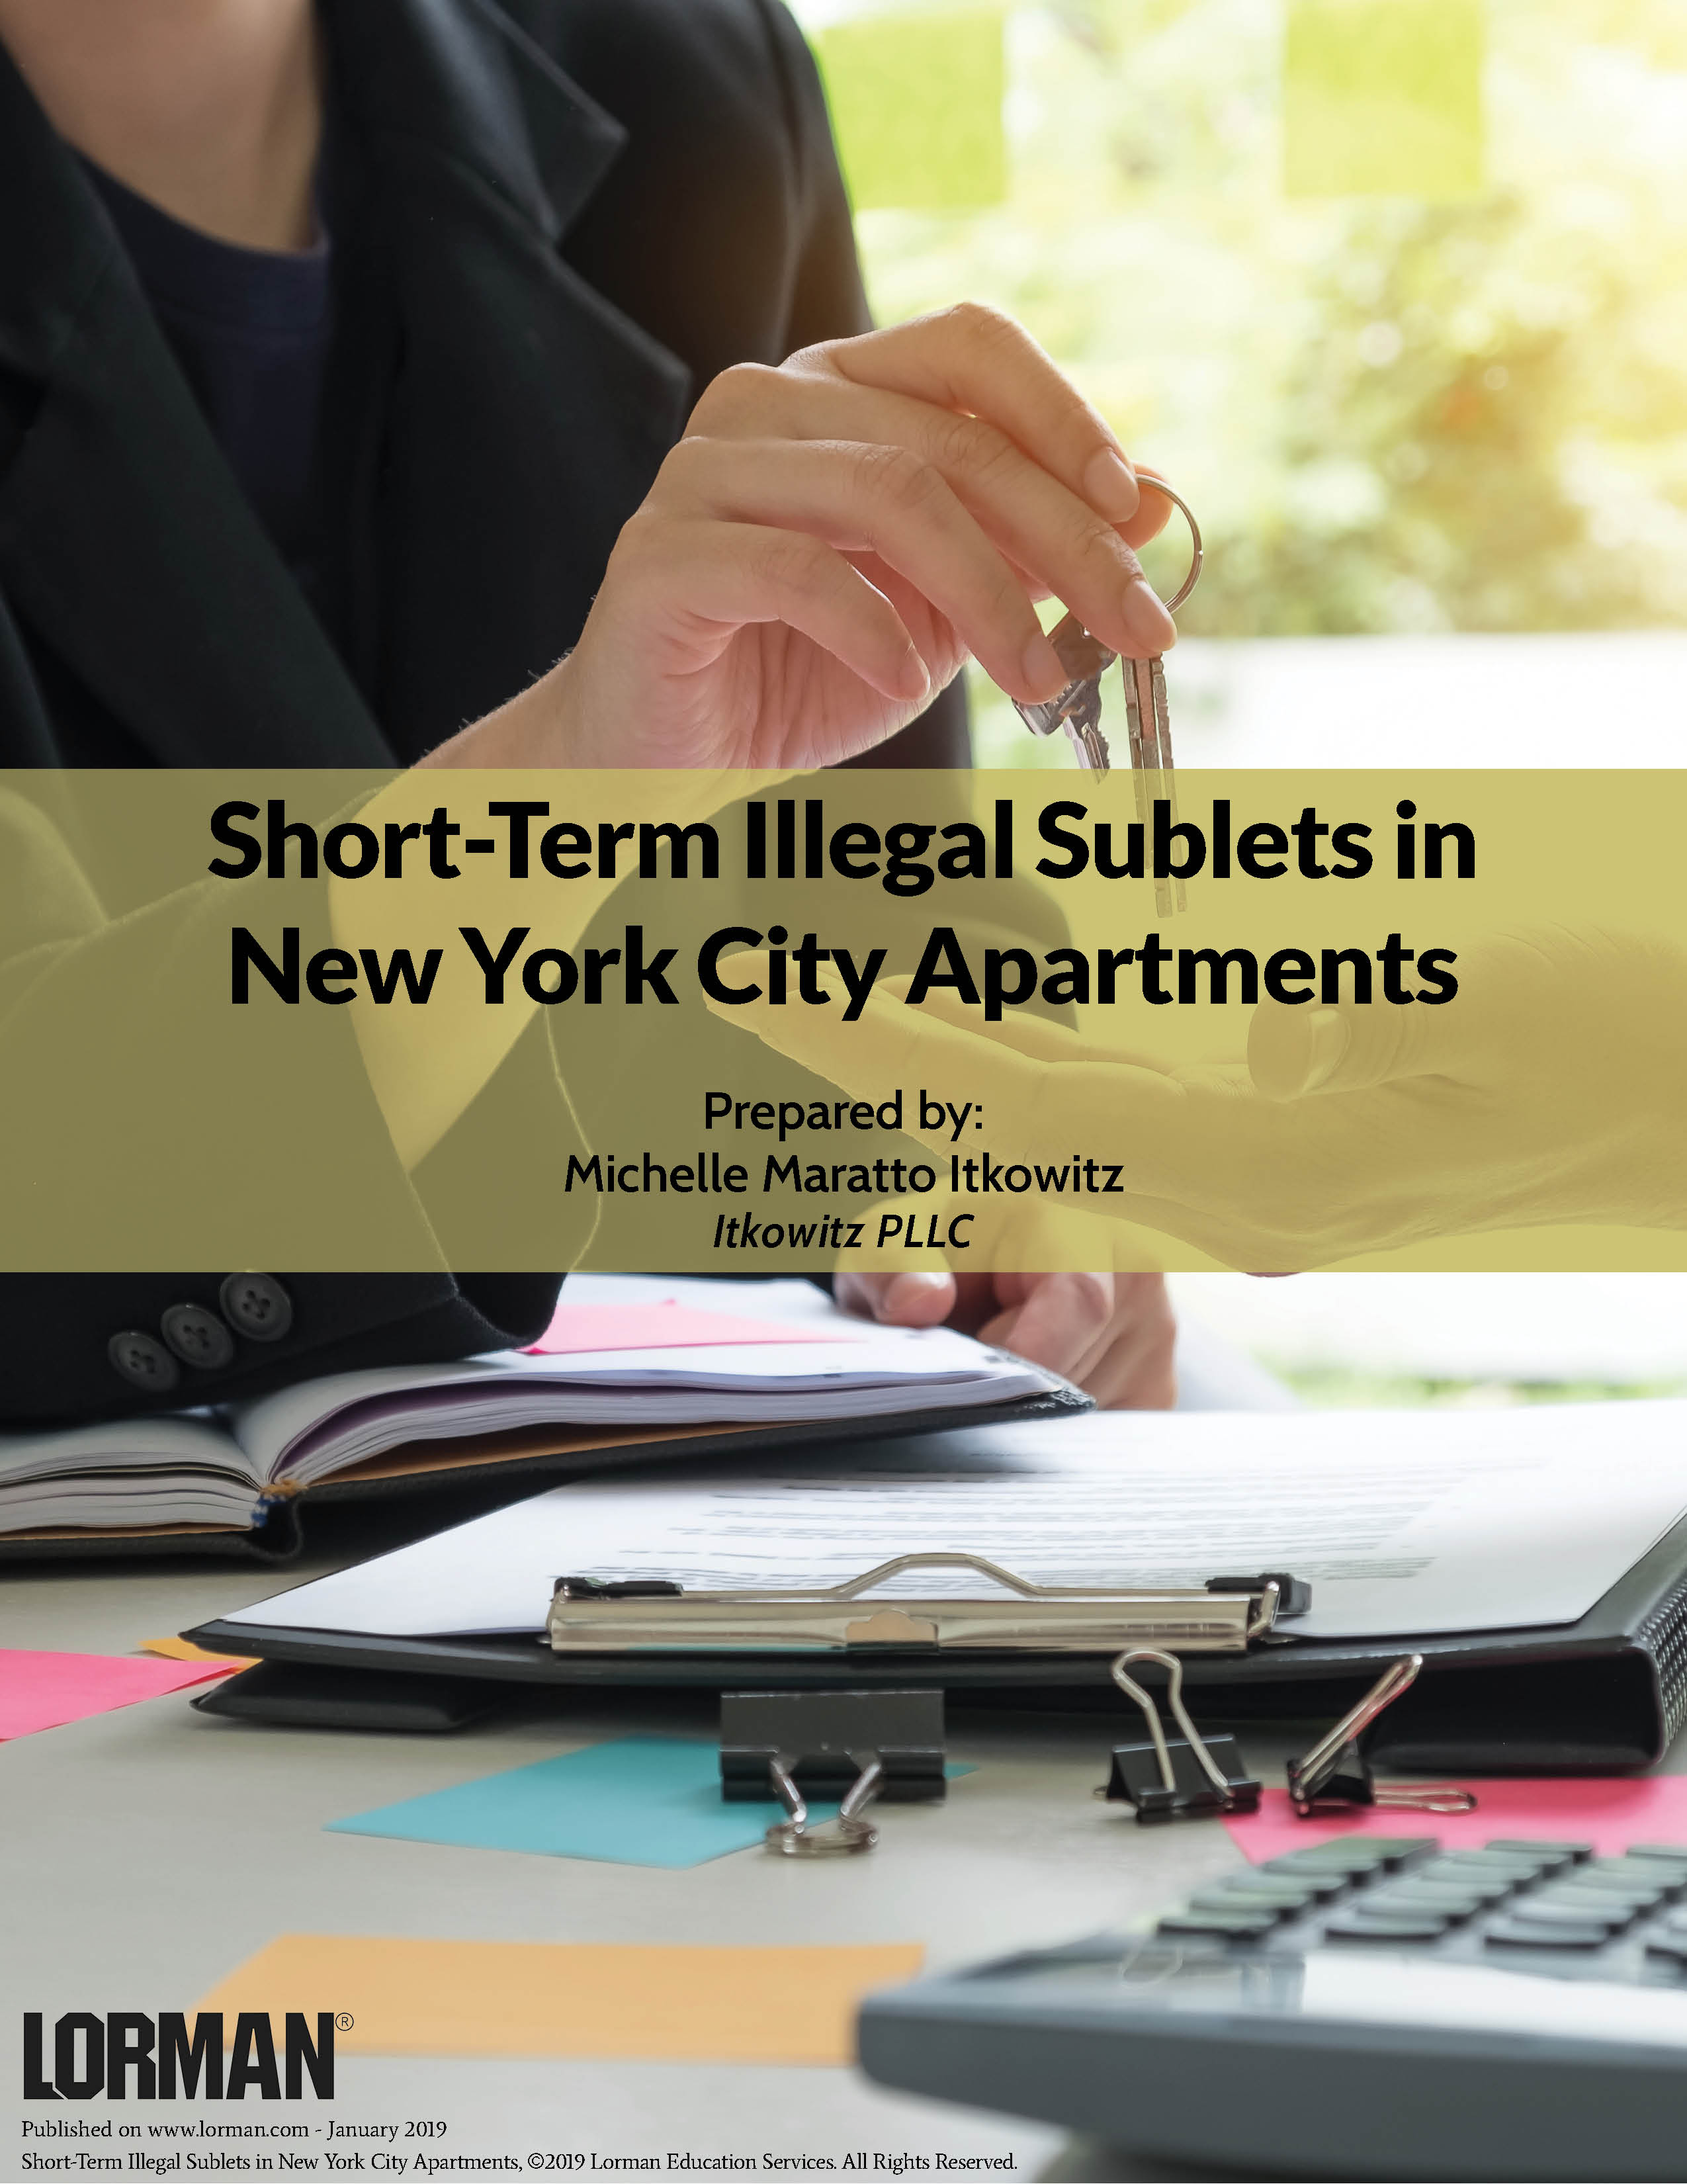 Short-Term Illegal Sublets in New York City Apartments